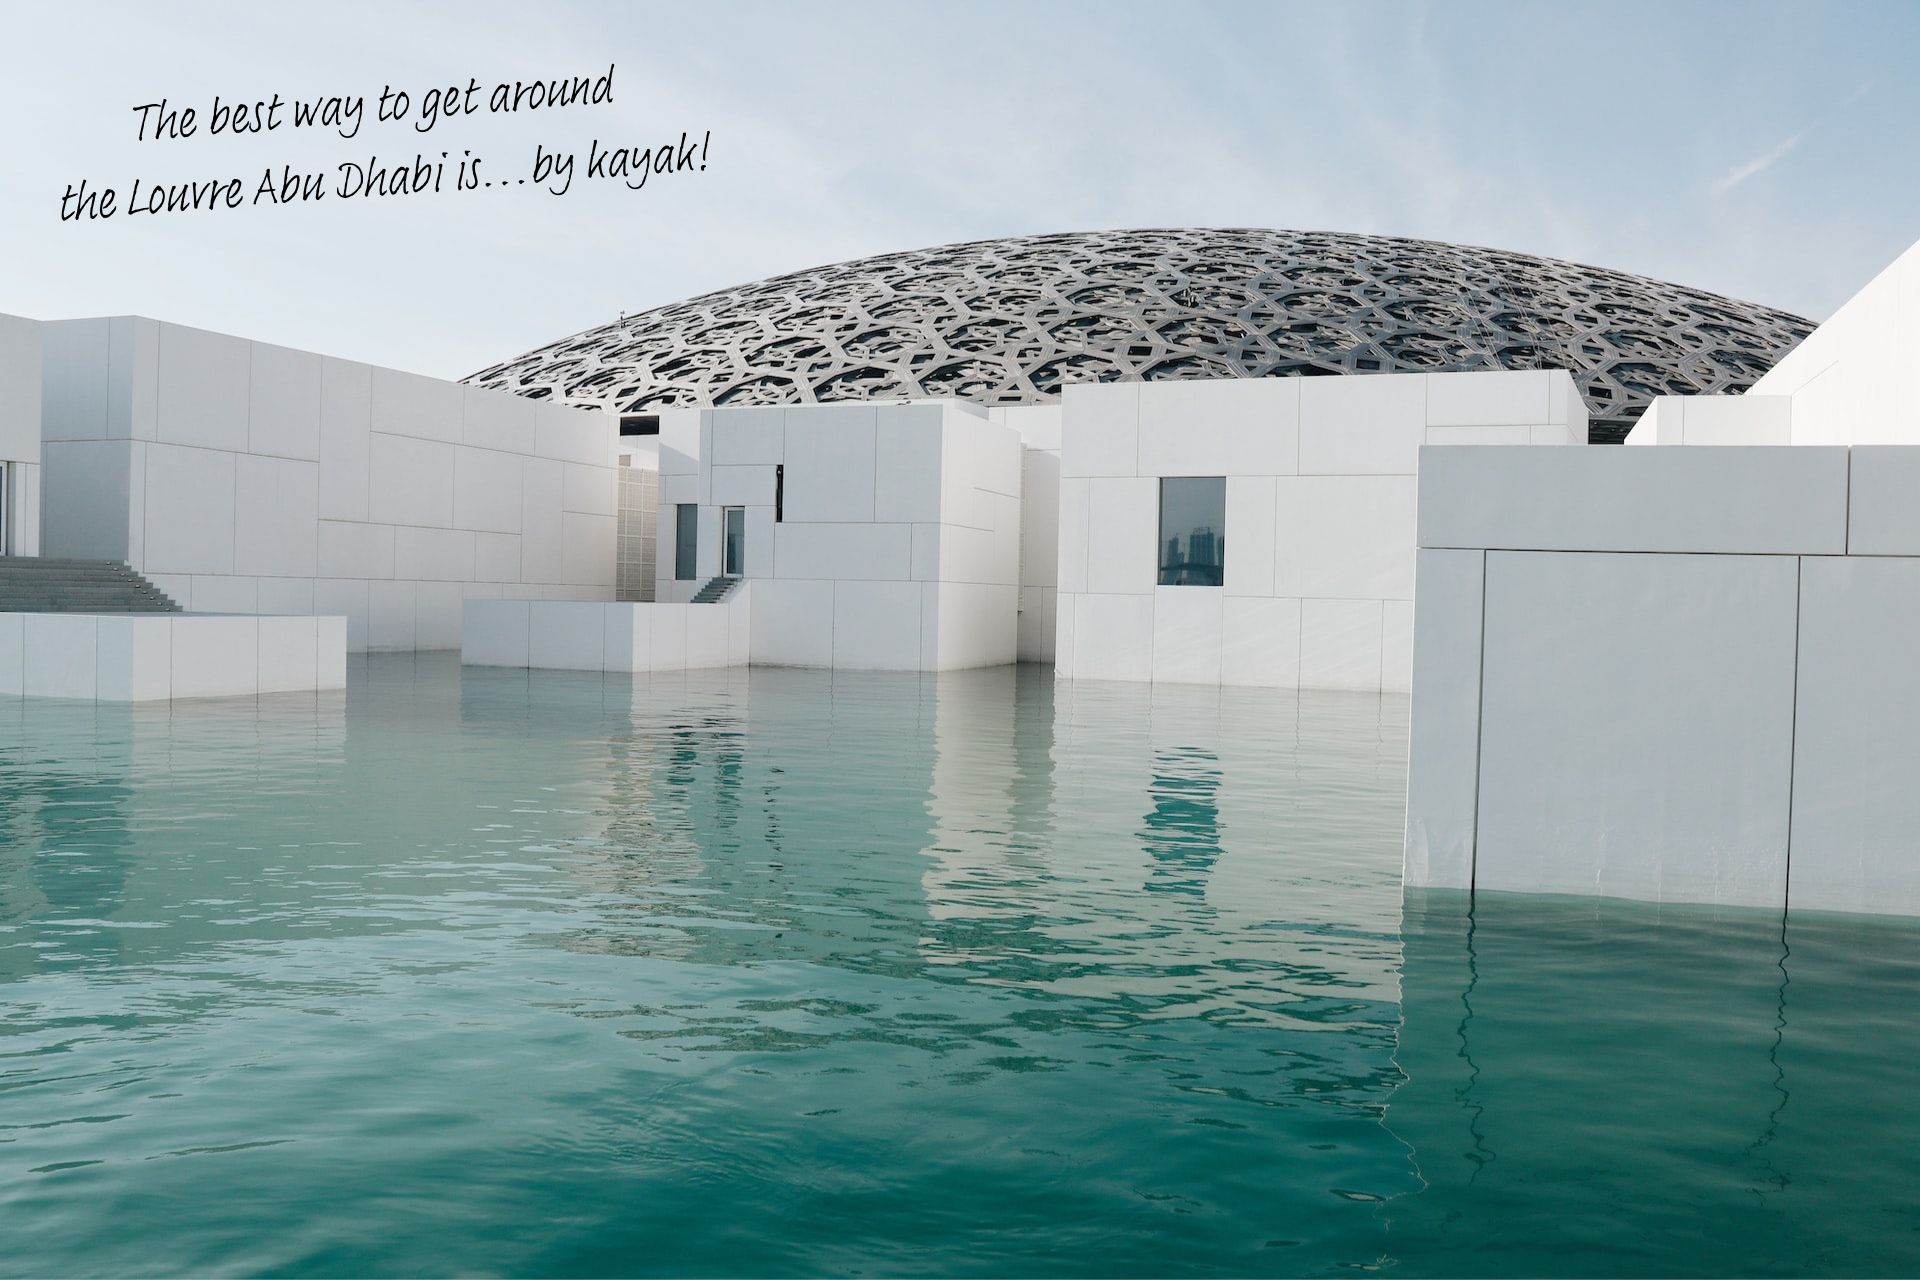 The dome of the Louvre Abu Dhabi, surrounded by water.